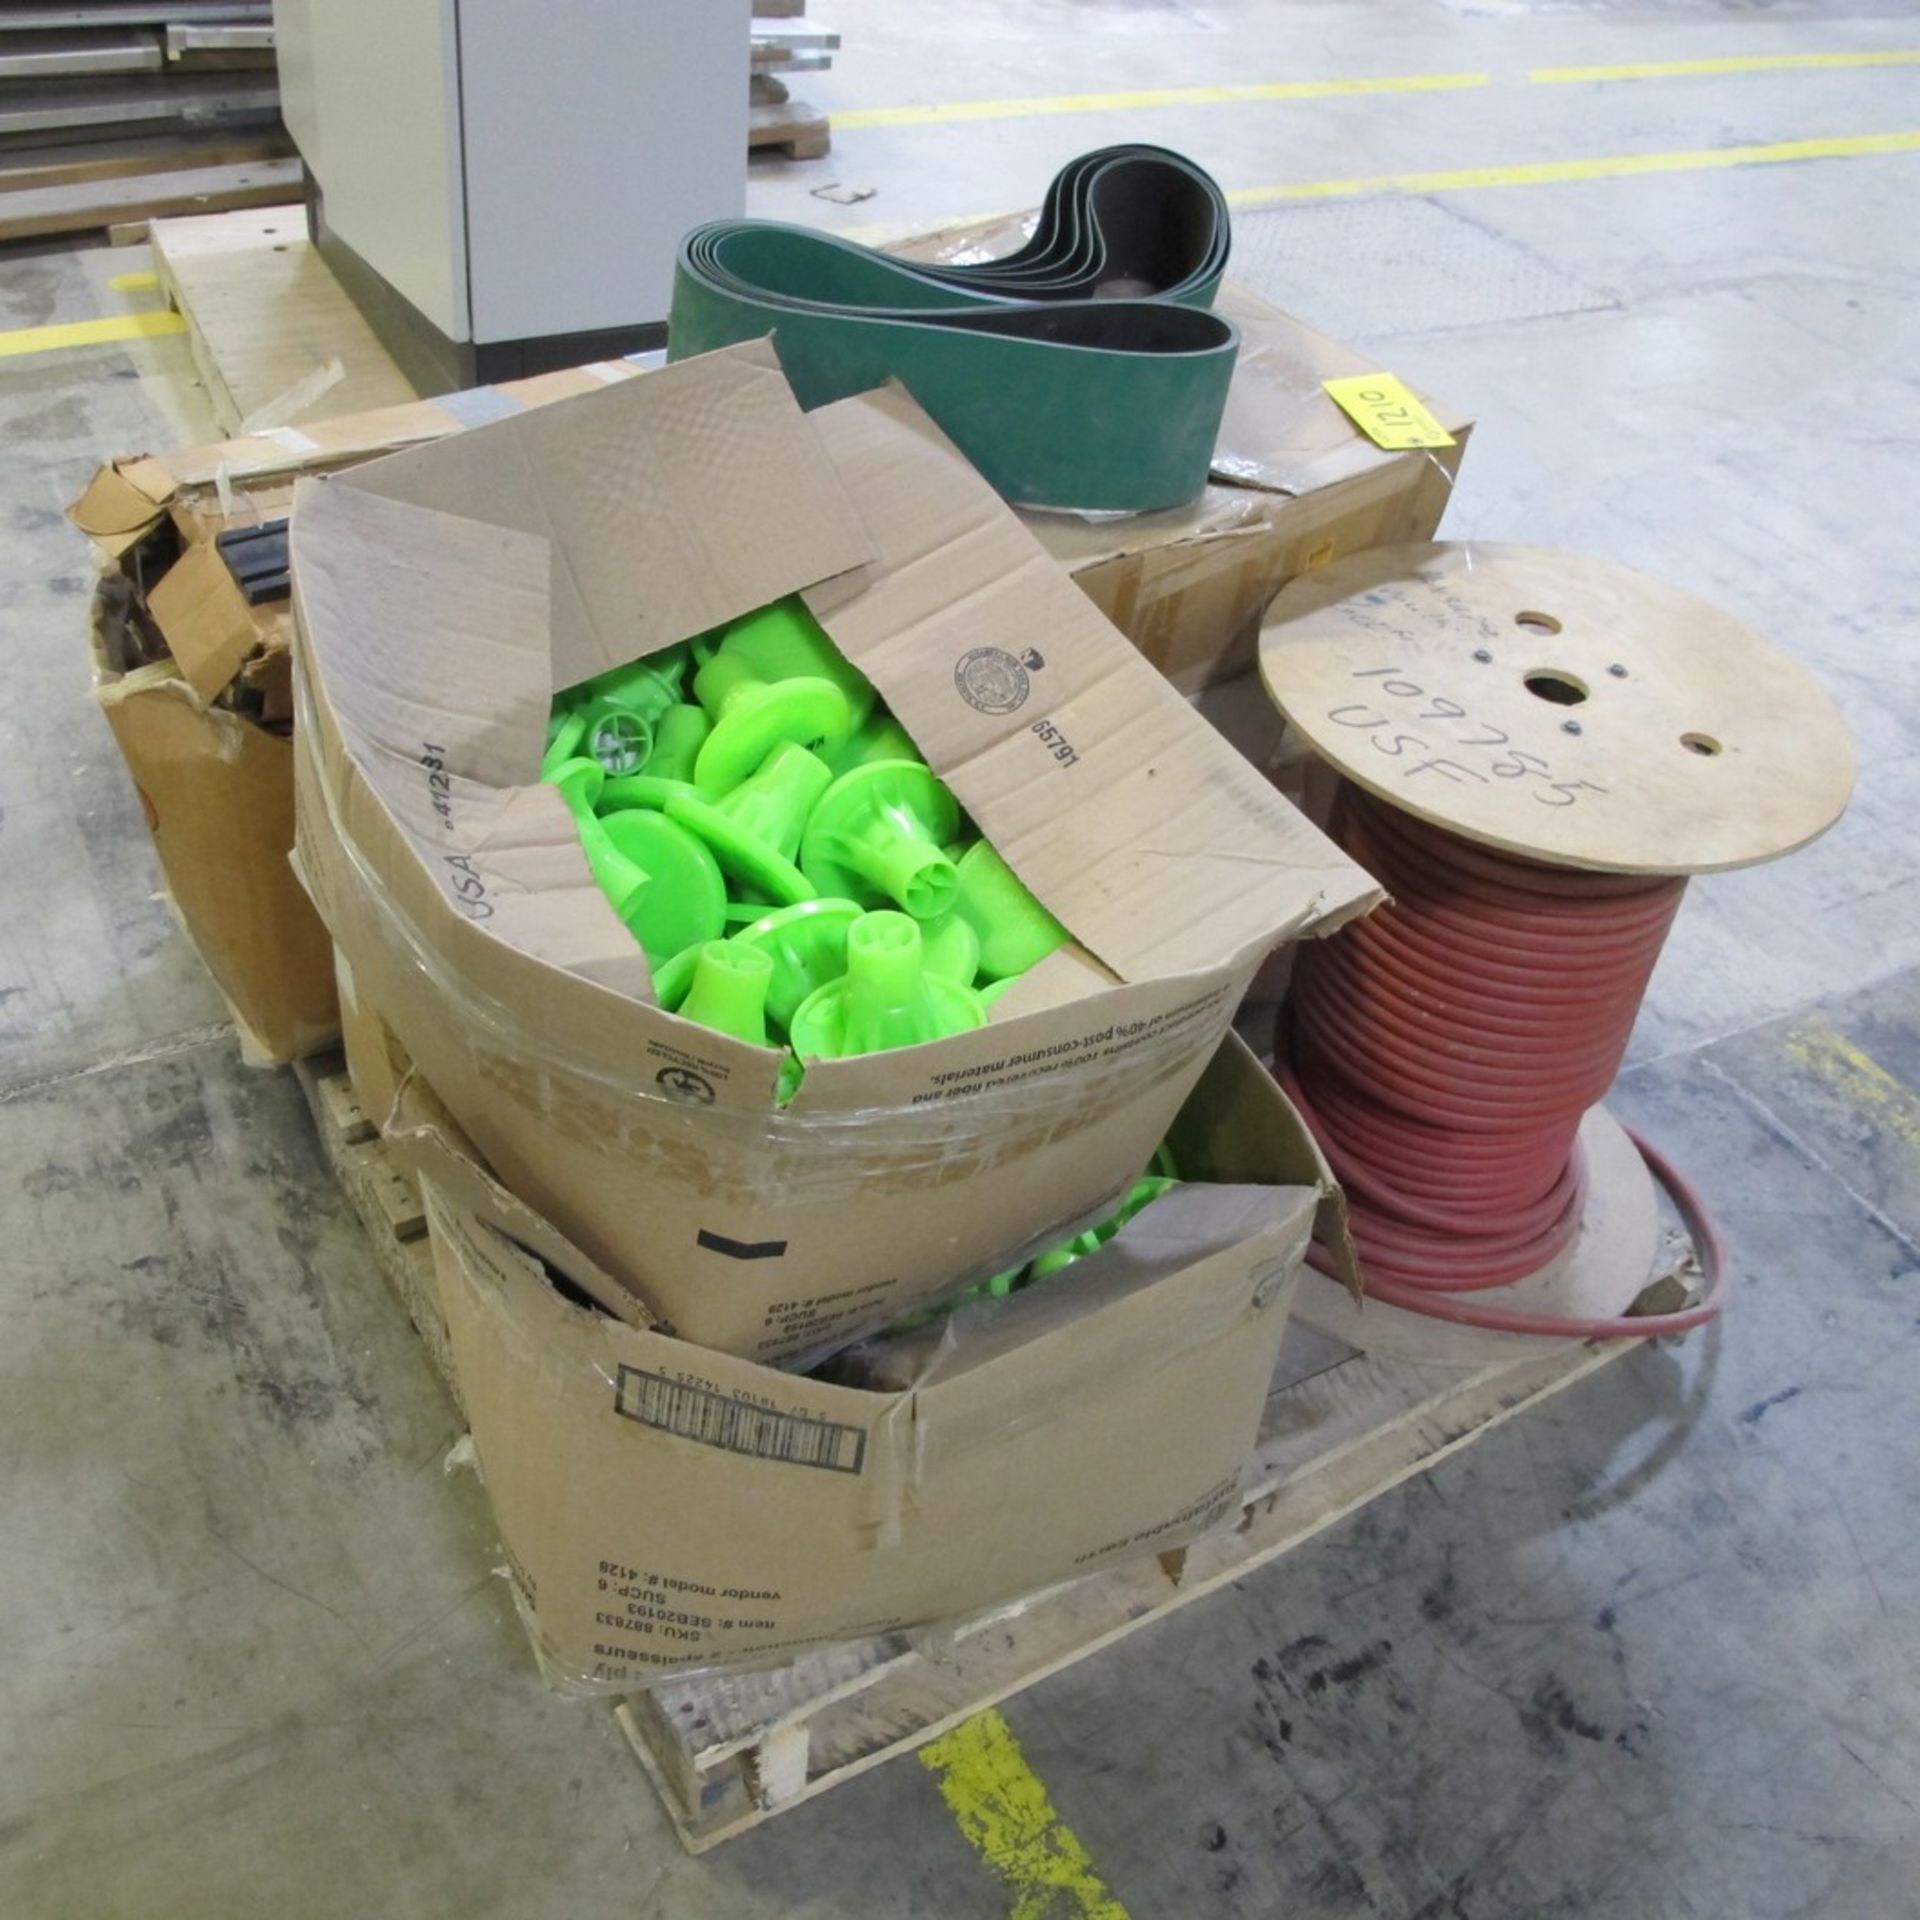 LOT OF (4) PALLETS MIXED CONTENTS, SANDING BELTS, SPOOL OF HOSE, ROLL PLUGS, OFFICE SUPPLIES, WIRE